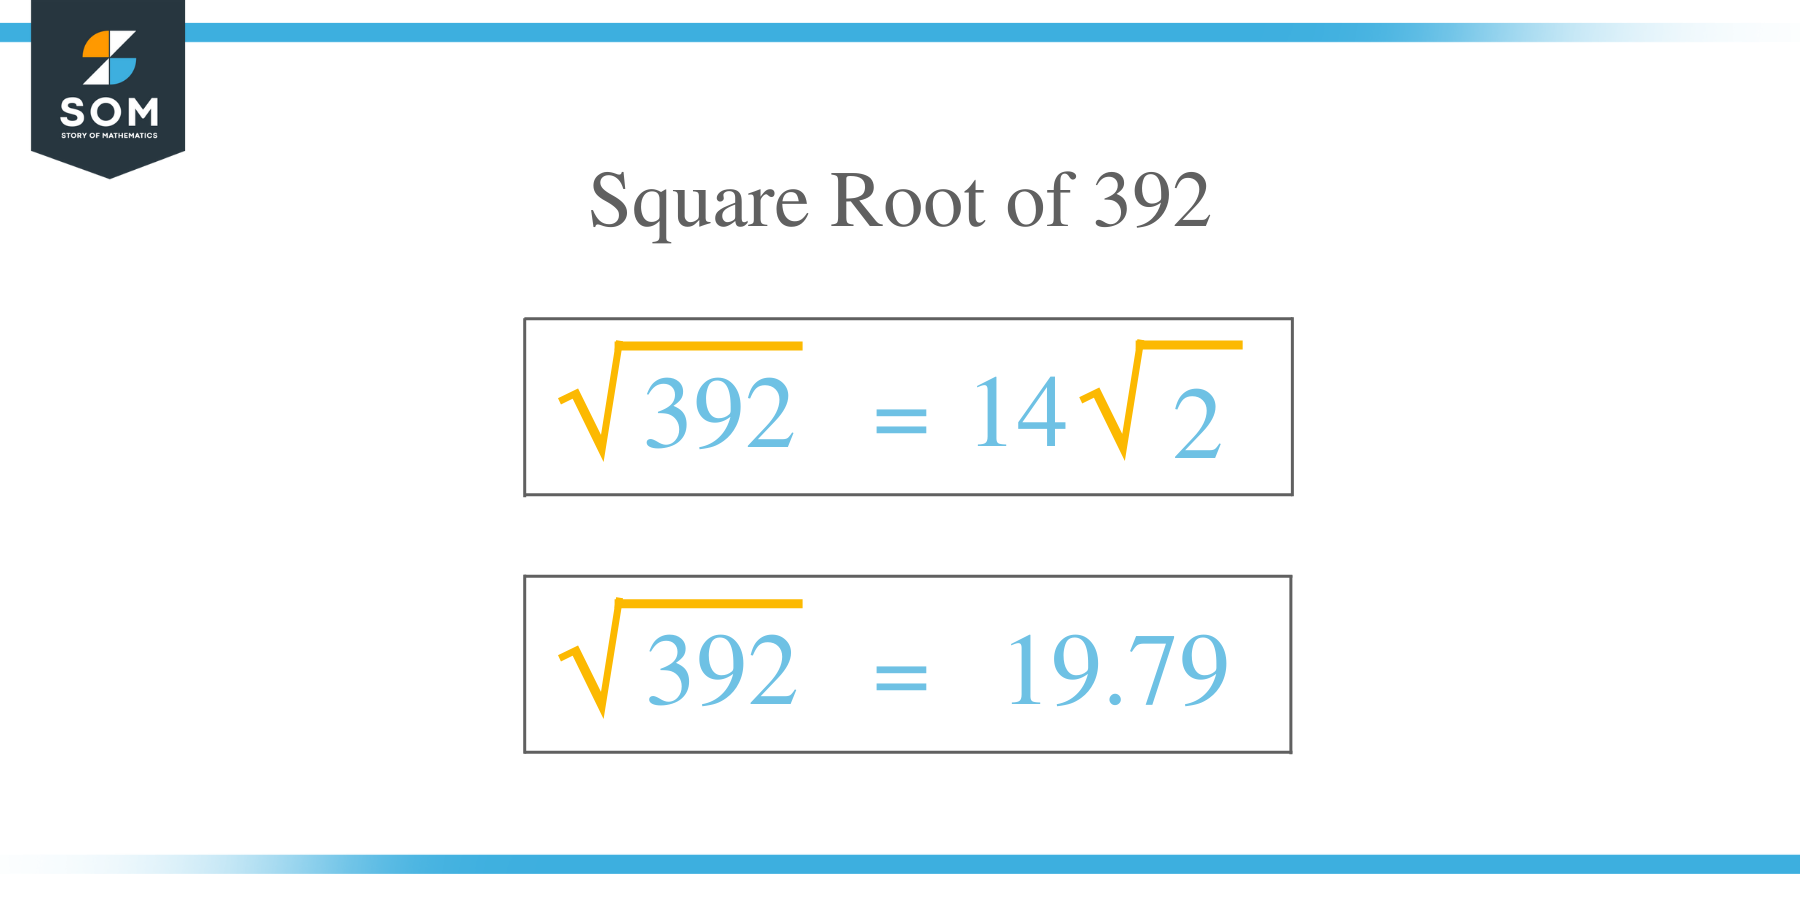 Square Root of 392